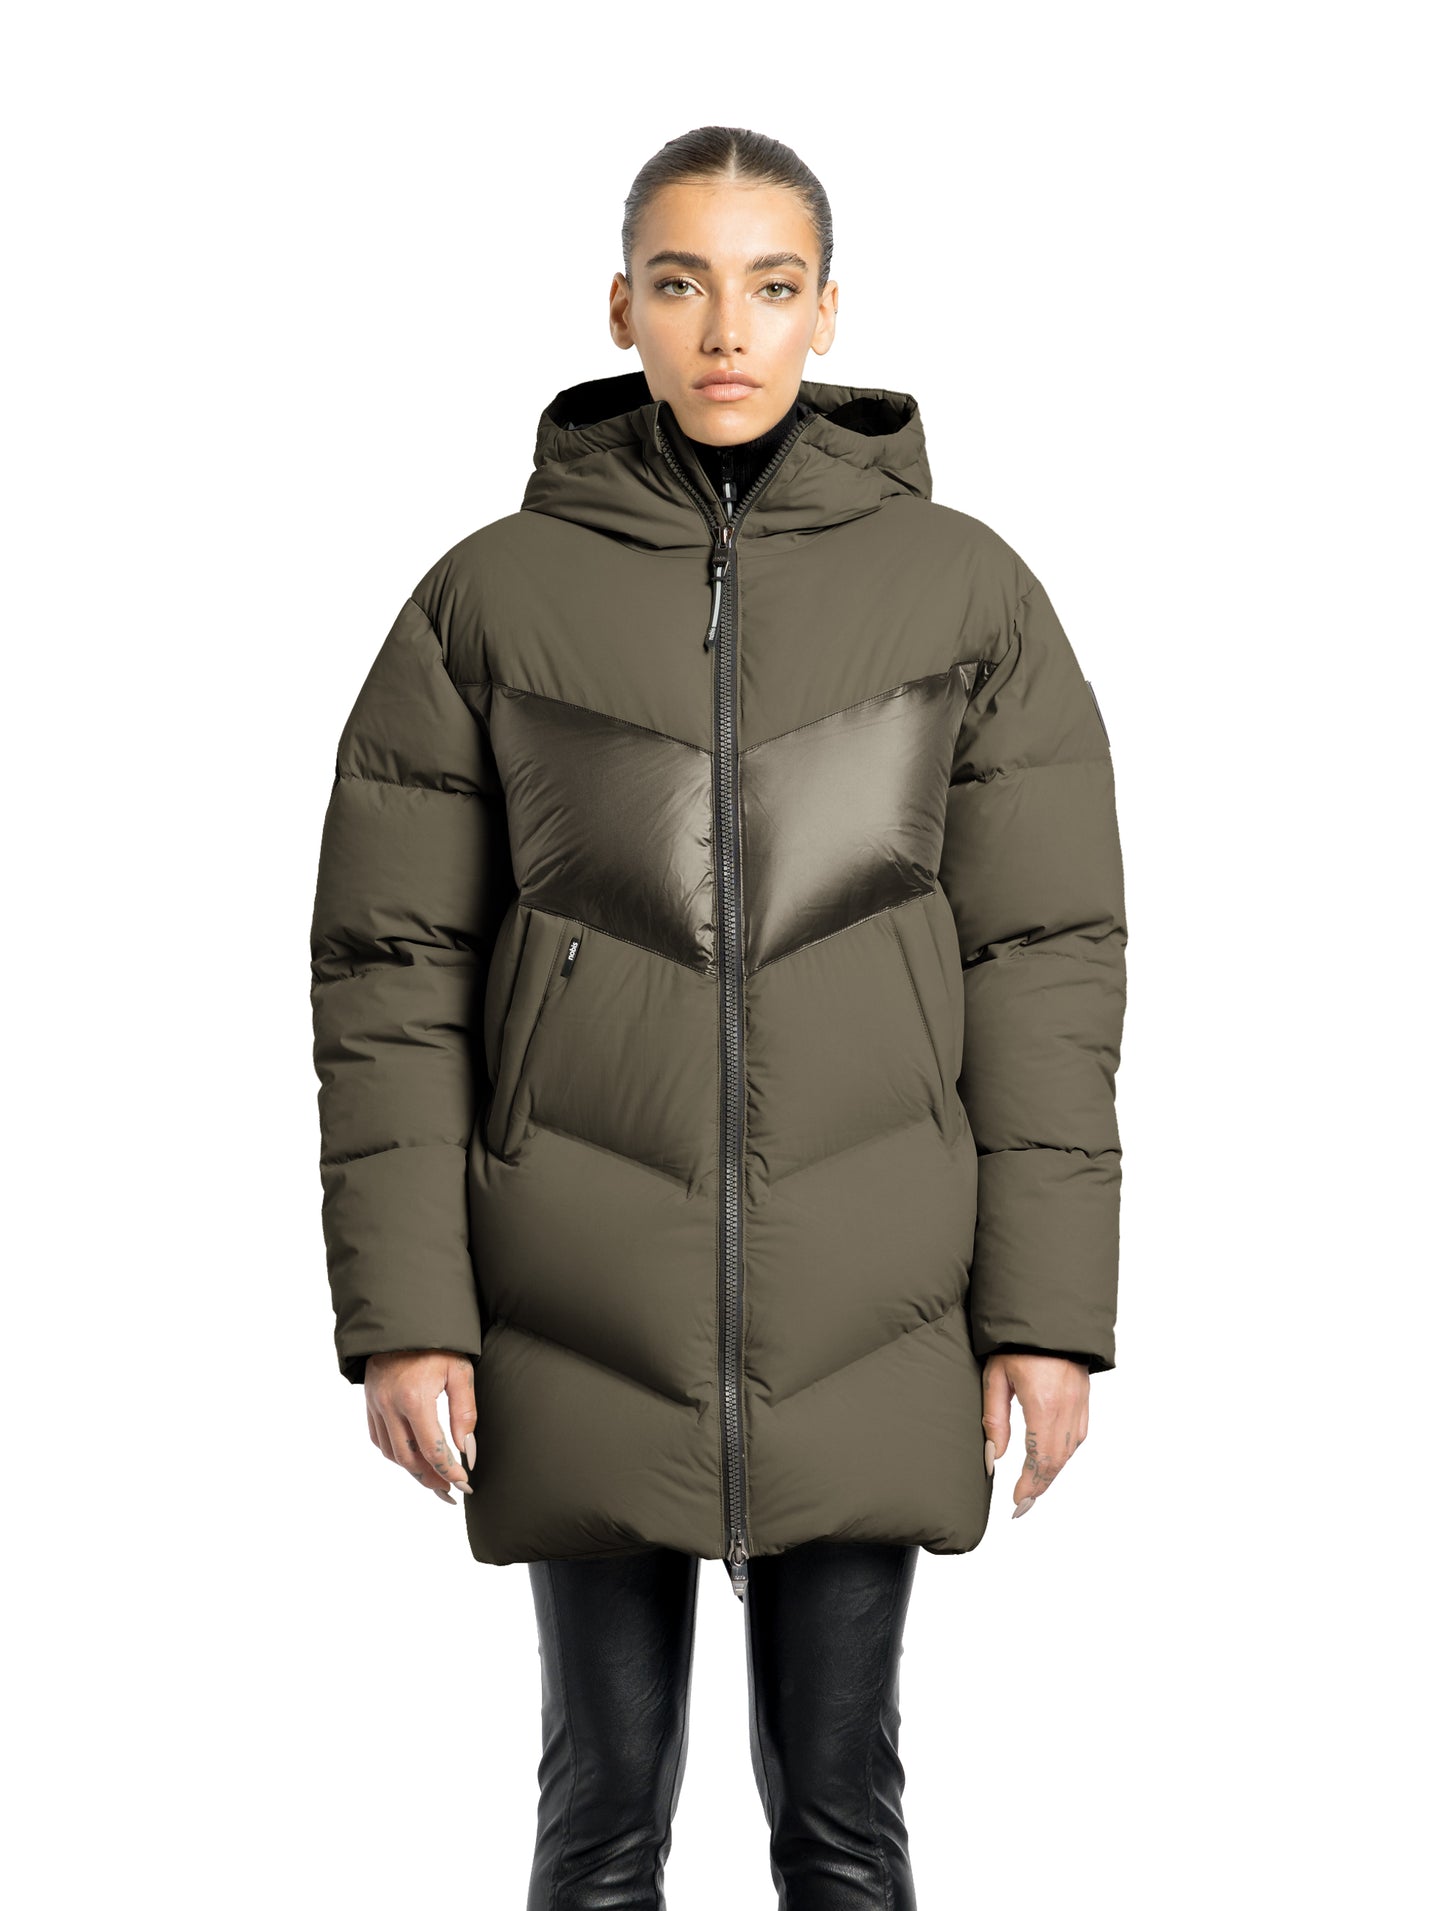 Isla Women's Chevron Quilted Puffer Jacket in thigh length, premium technical nylon taffeta fabrication, Premium Canadian origin White Duck Down insulation, non-removable down-filled hood, two-way centre-front zipper, zipper pockets at waist, contrast cire technical nylon taffeta detailing on chest and back, in Fatigue